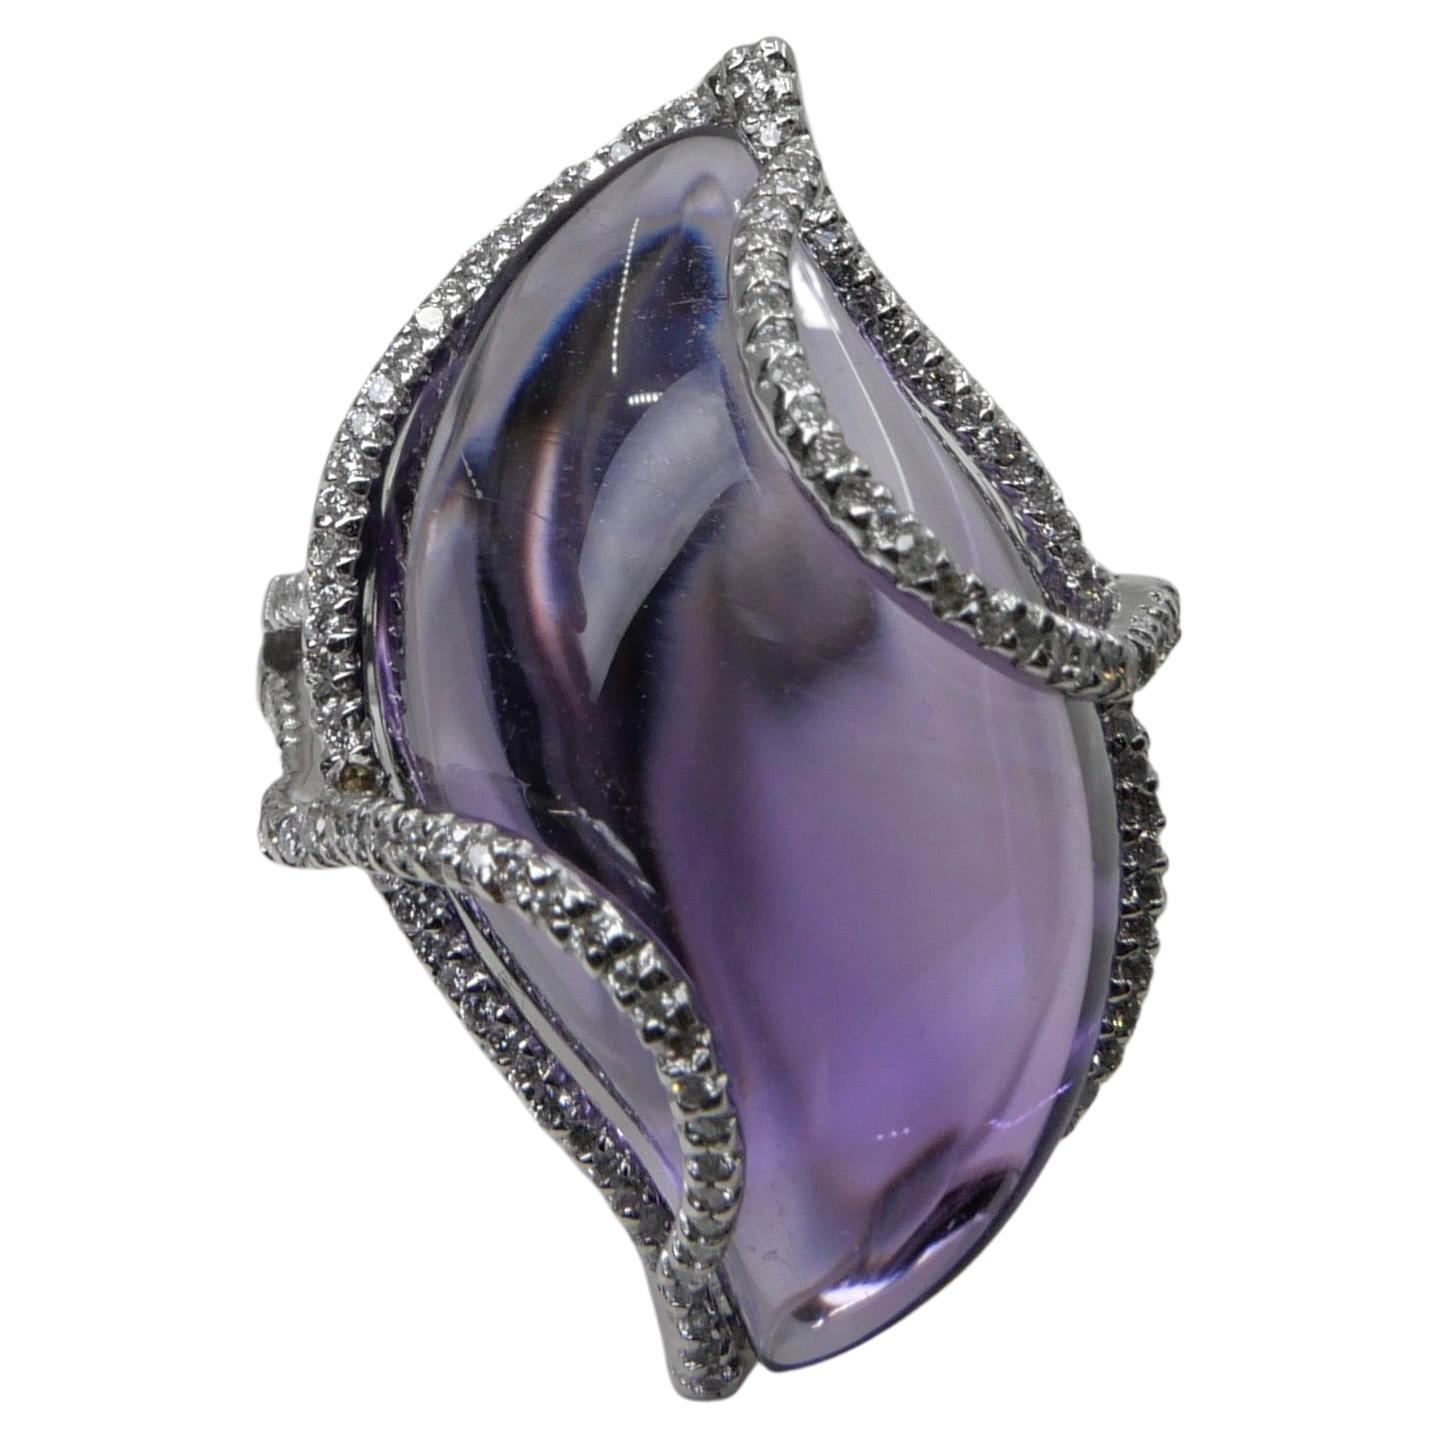 23 Carat Amethyst & Diamond Cocktail Ring. Large Contemporary Statement Ring.    For Sale